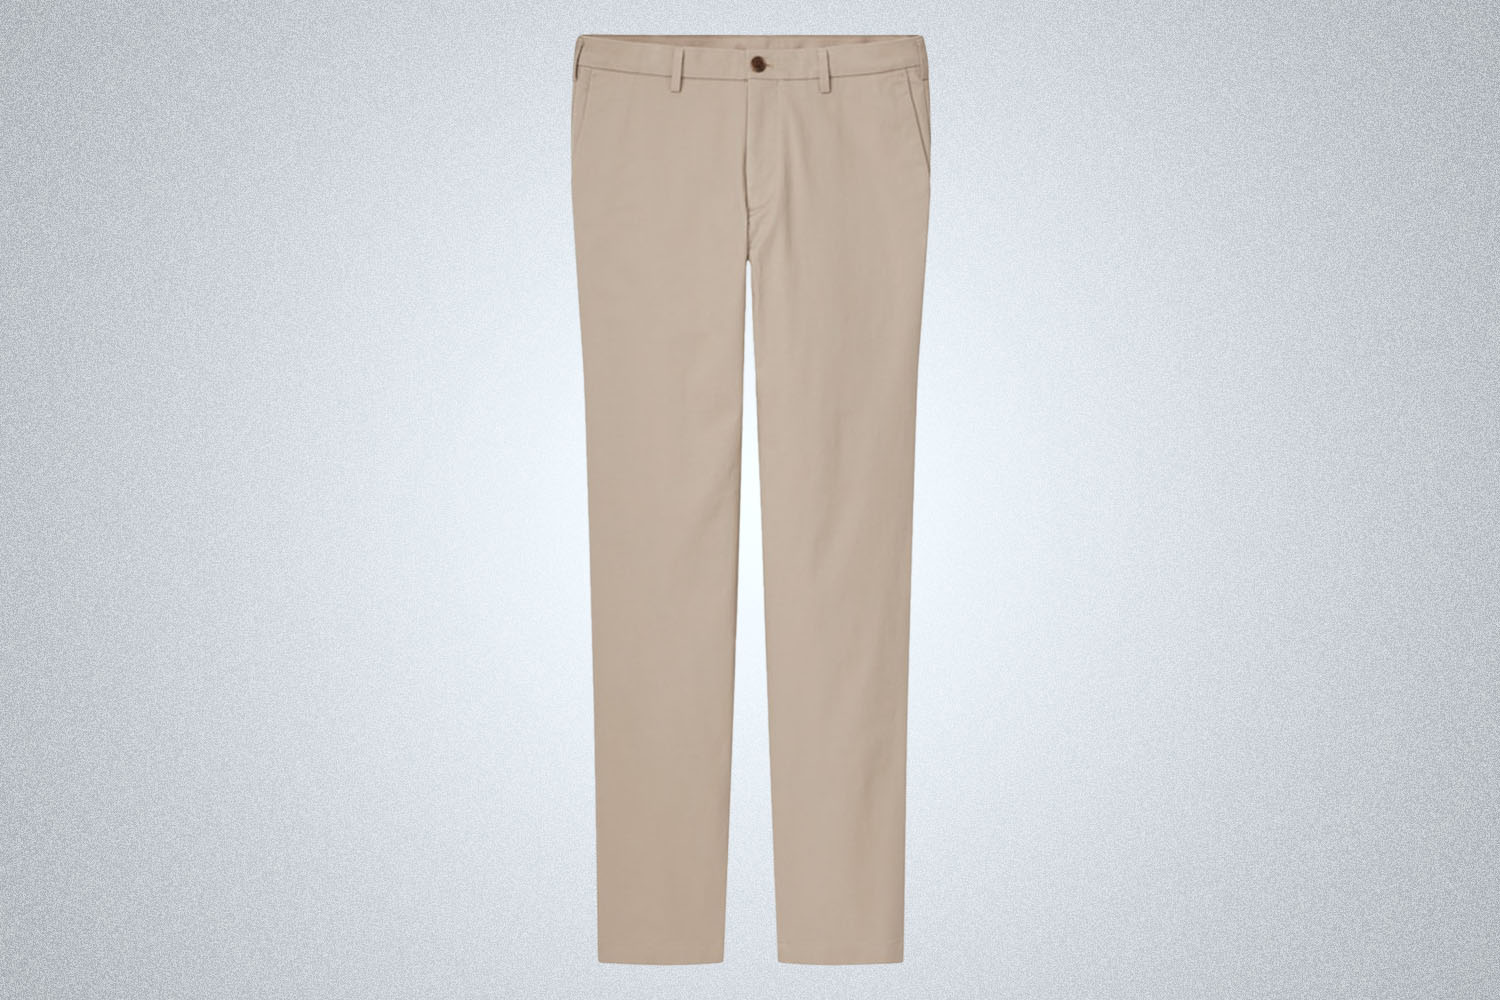 a pair of tan Uniqlo chinos on a grey background 